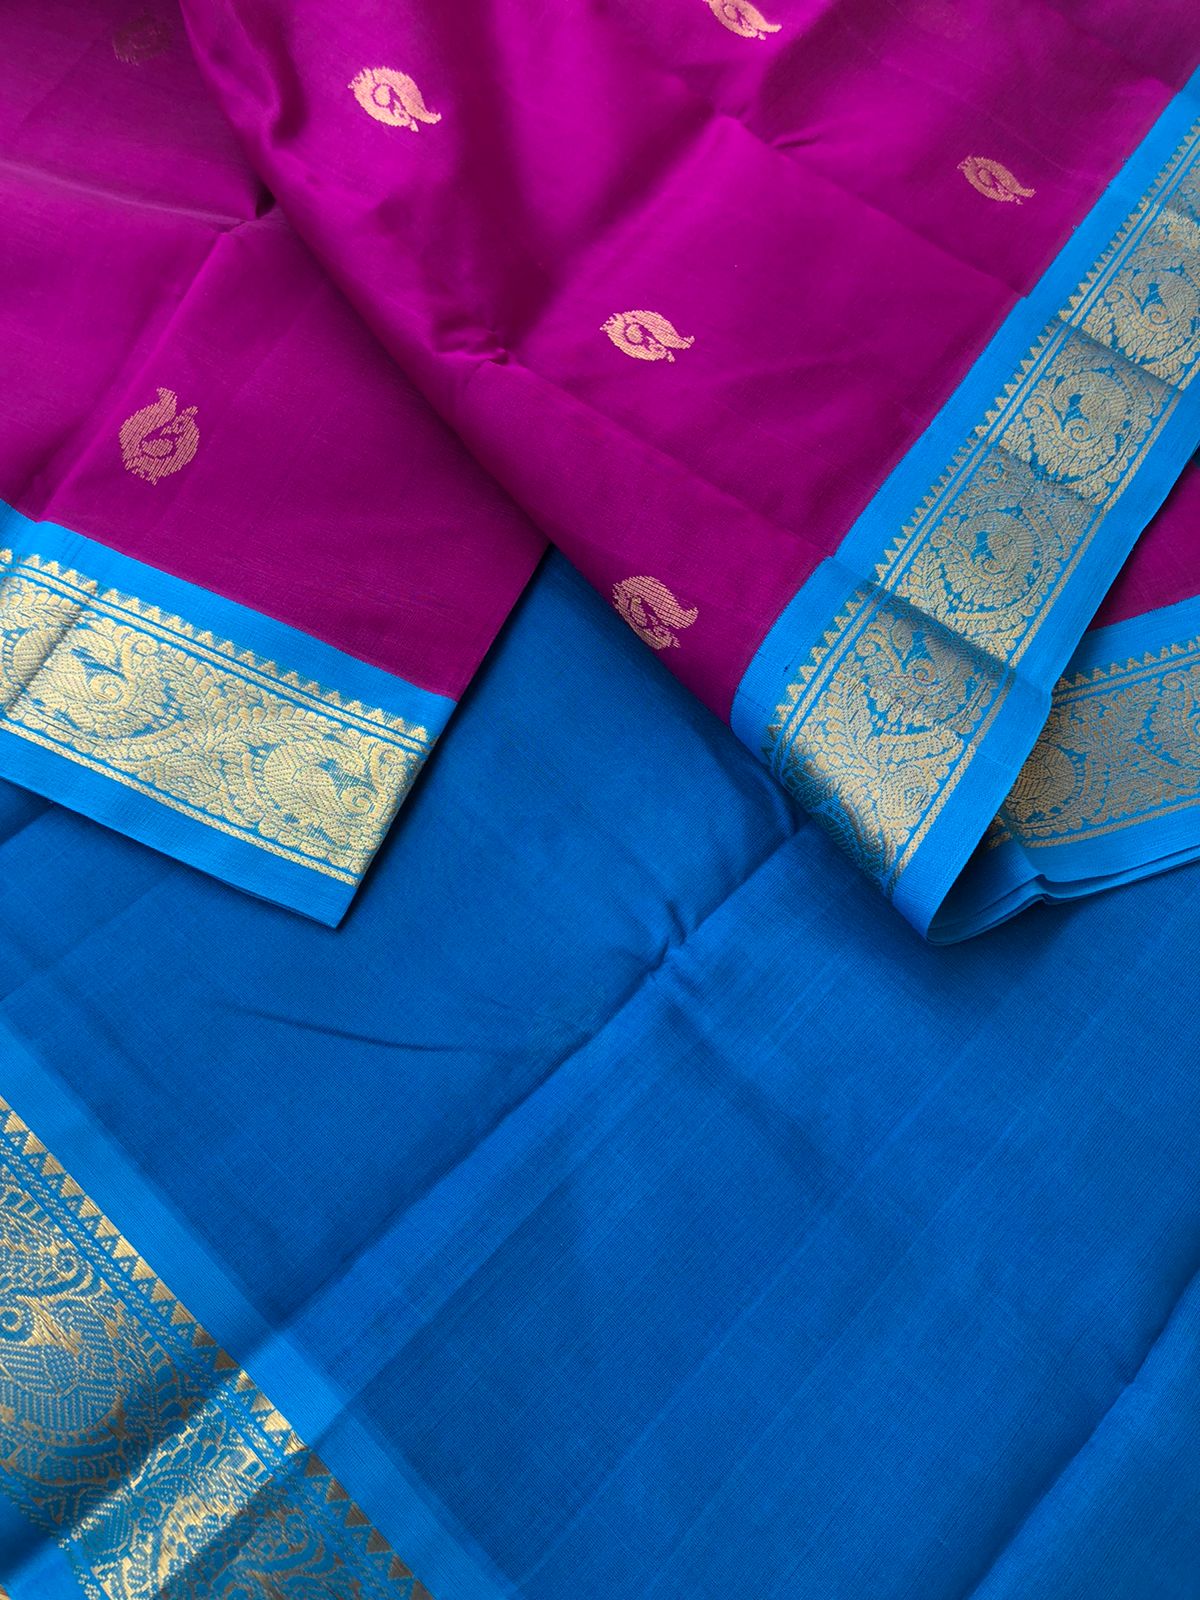 Korvai Silk Cotton - purple and sulphate blue